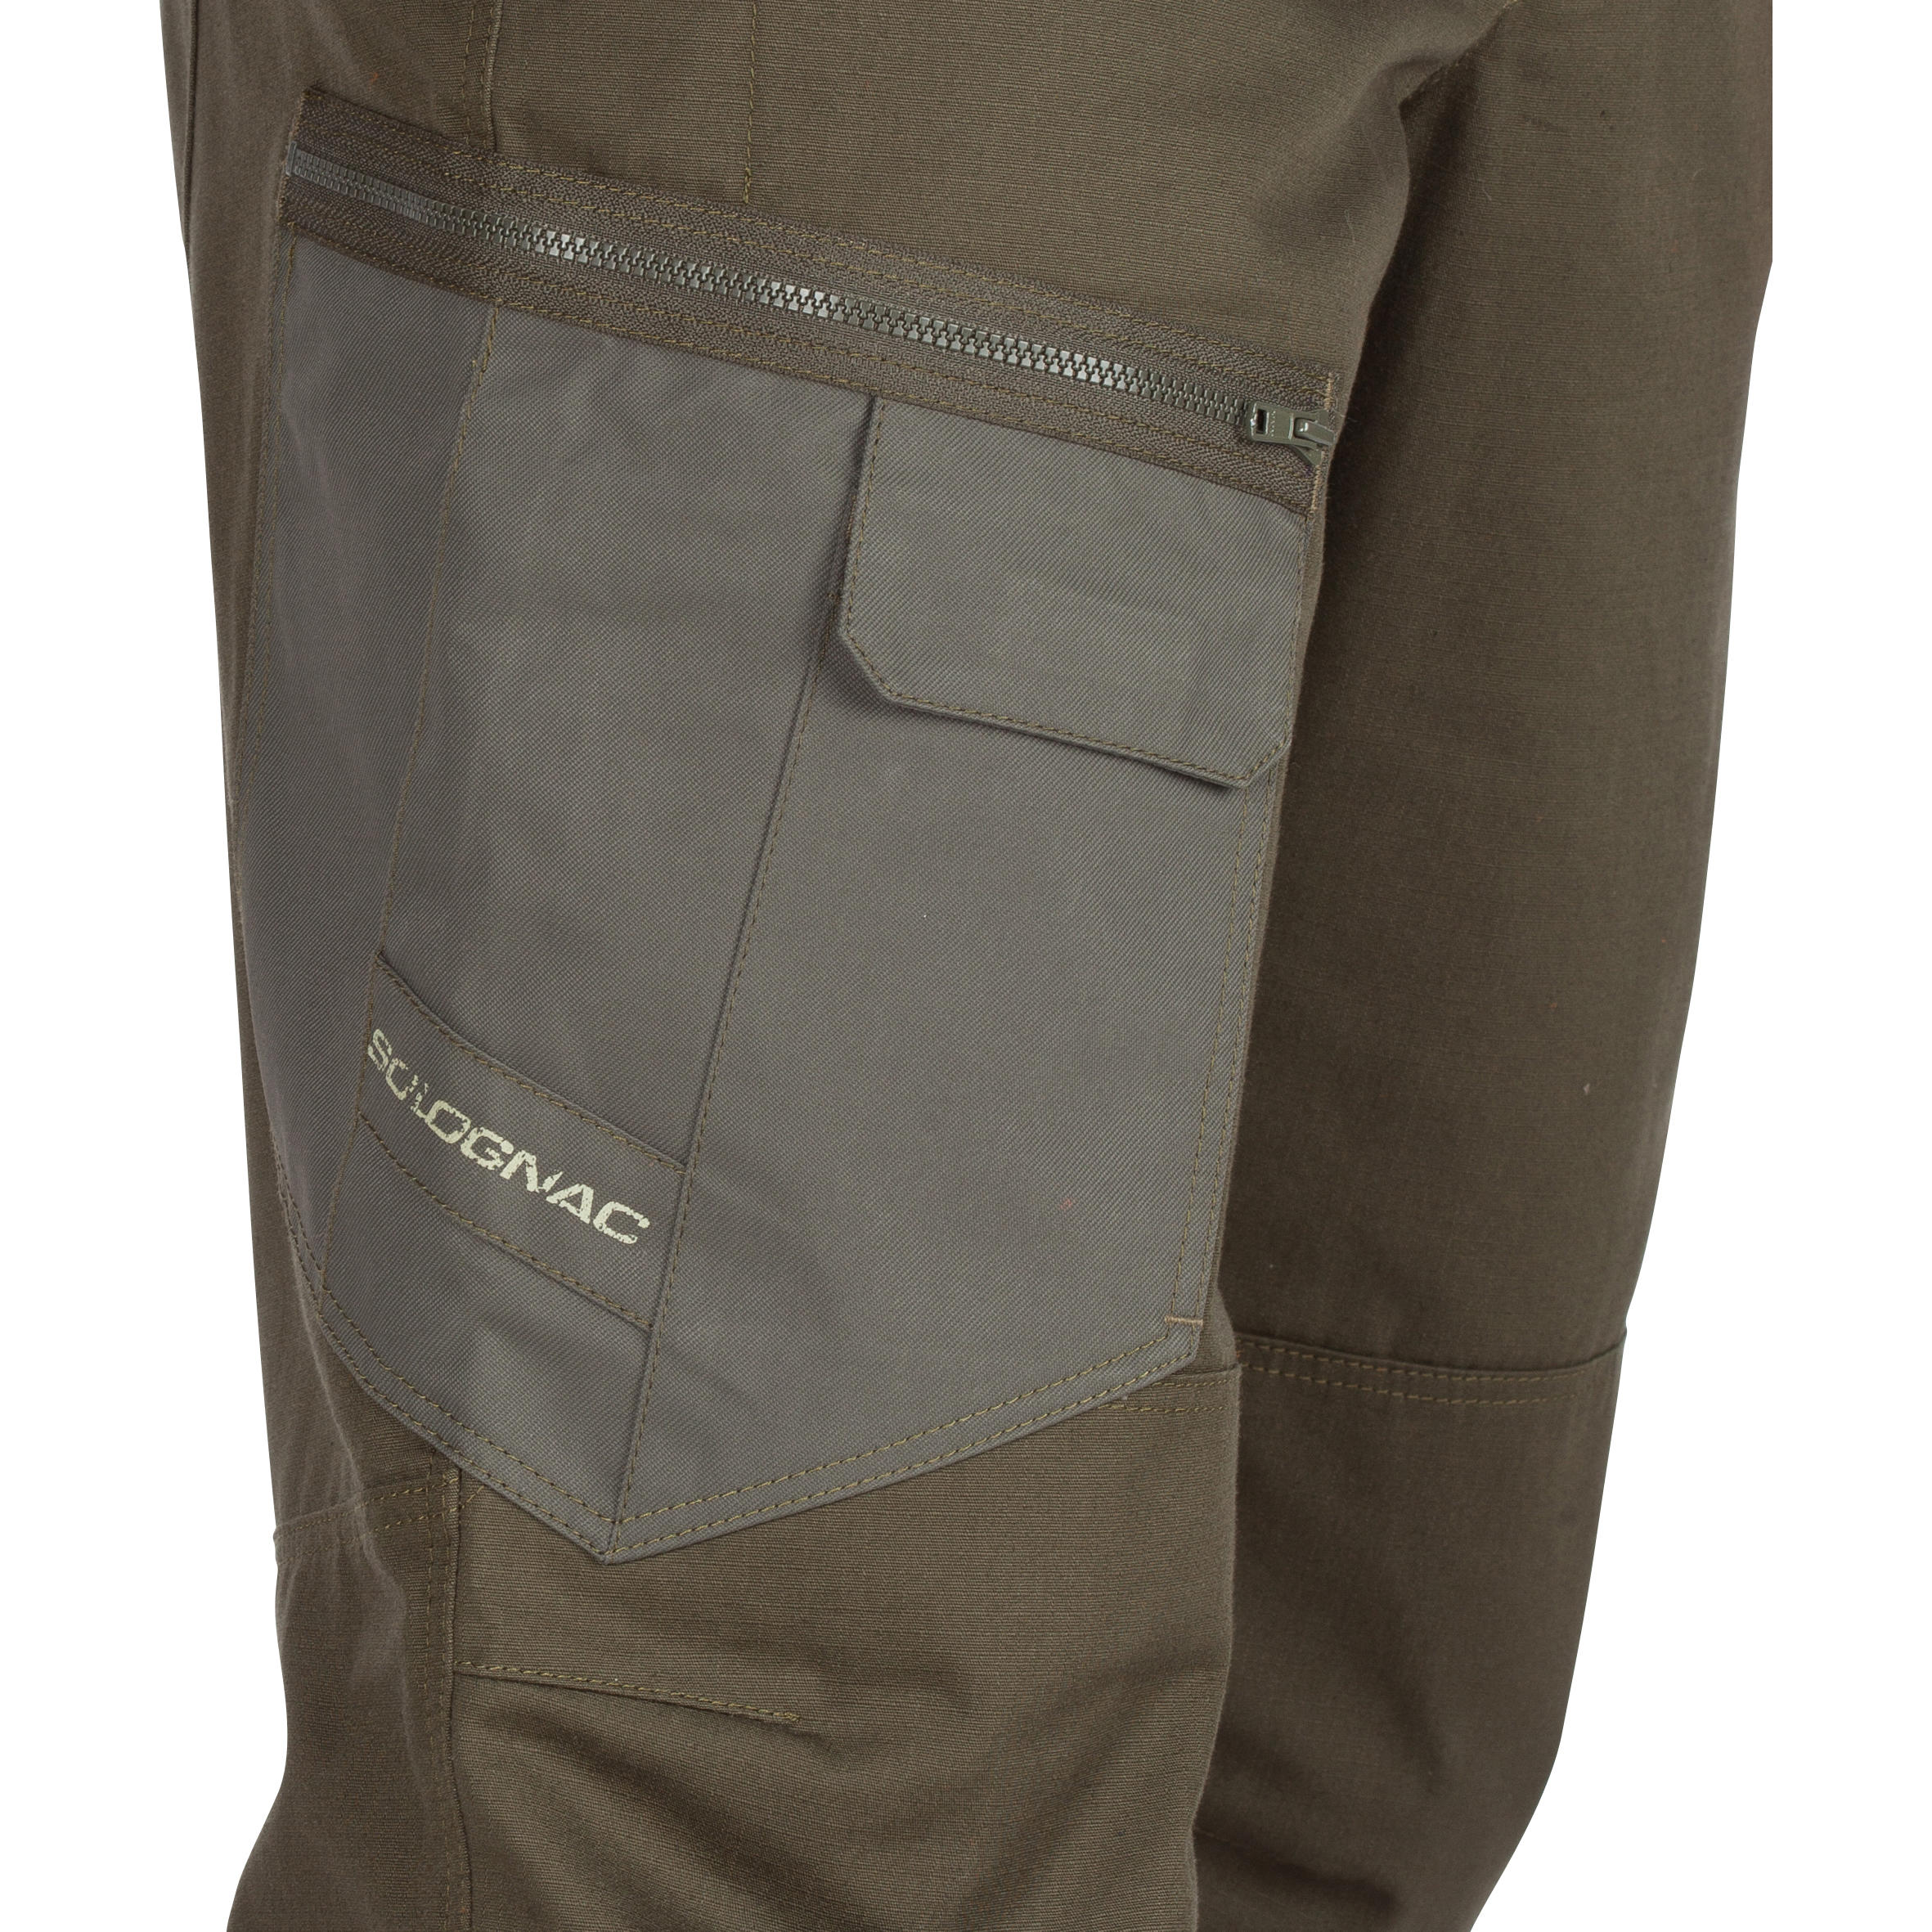 Impertane tapered hunting trousers - green - Decathlon